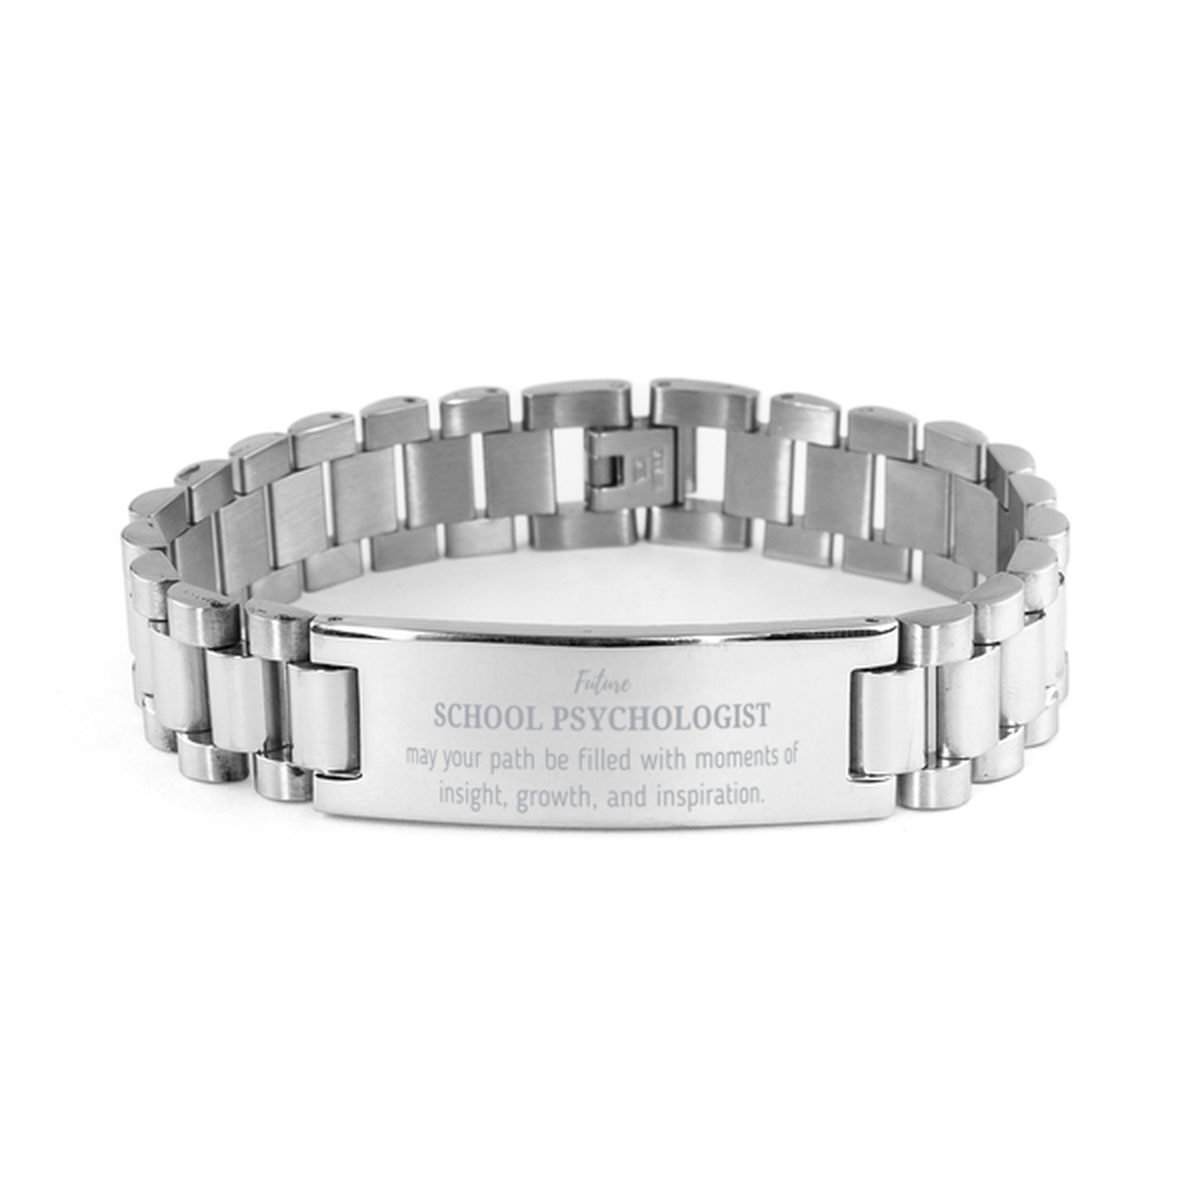 Future School Psychologist Gifts, May your path be filled with moments of insight, Graduation Gifts for New School Psychologist, Christmas Unique Ladder Stainless Steel Bracelet For Men, Women, Friends